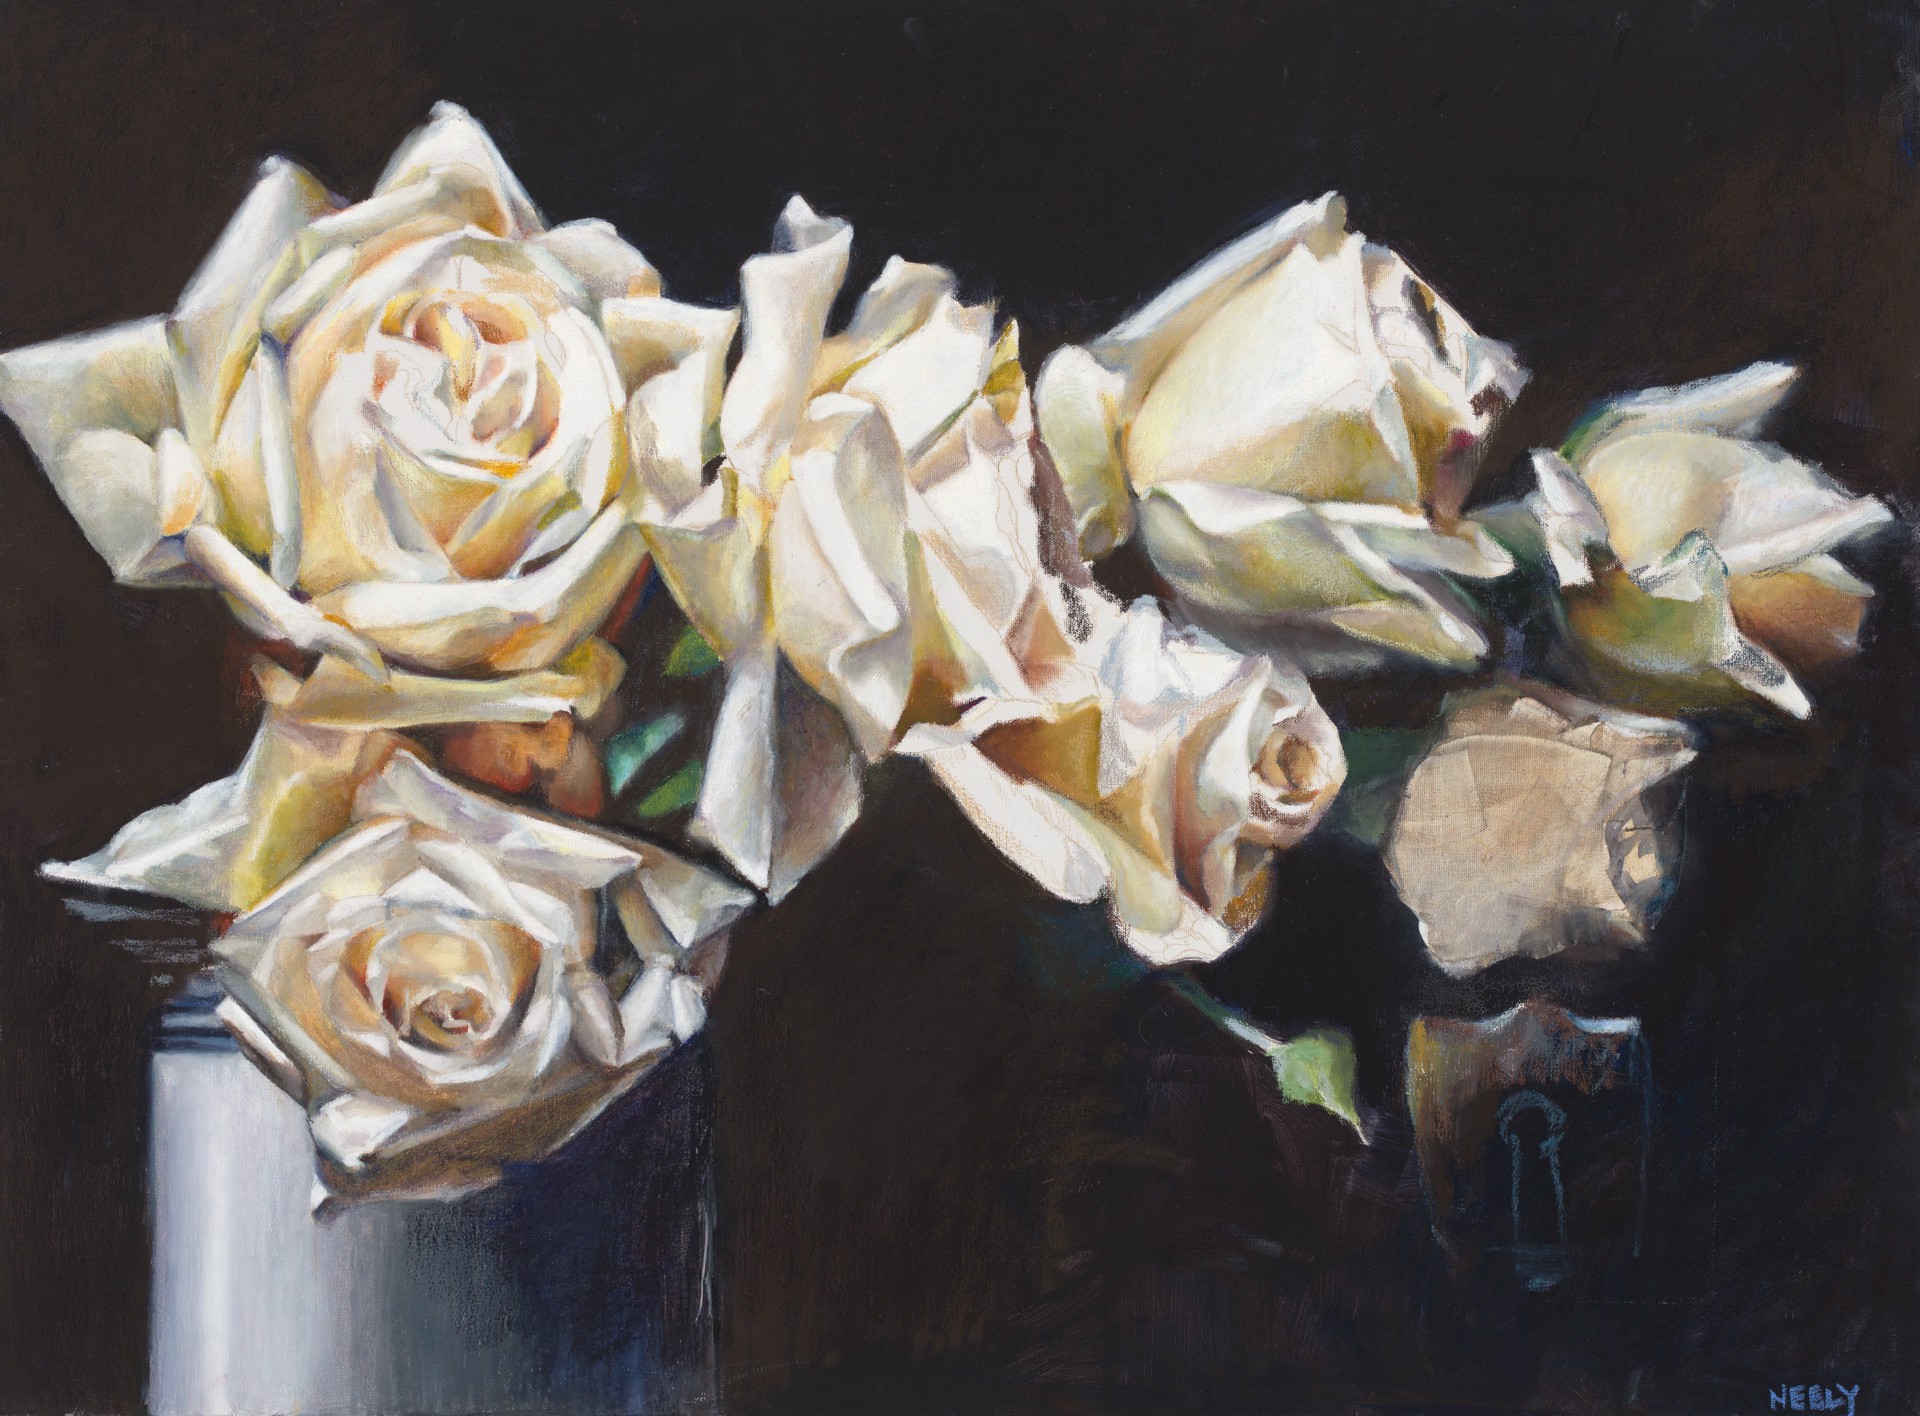 Seven White Roses by Stephanie Neely